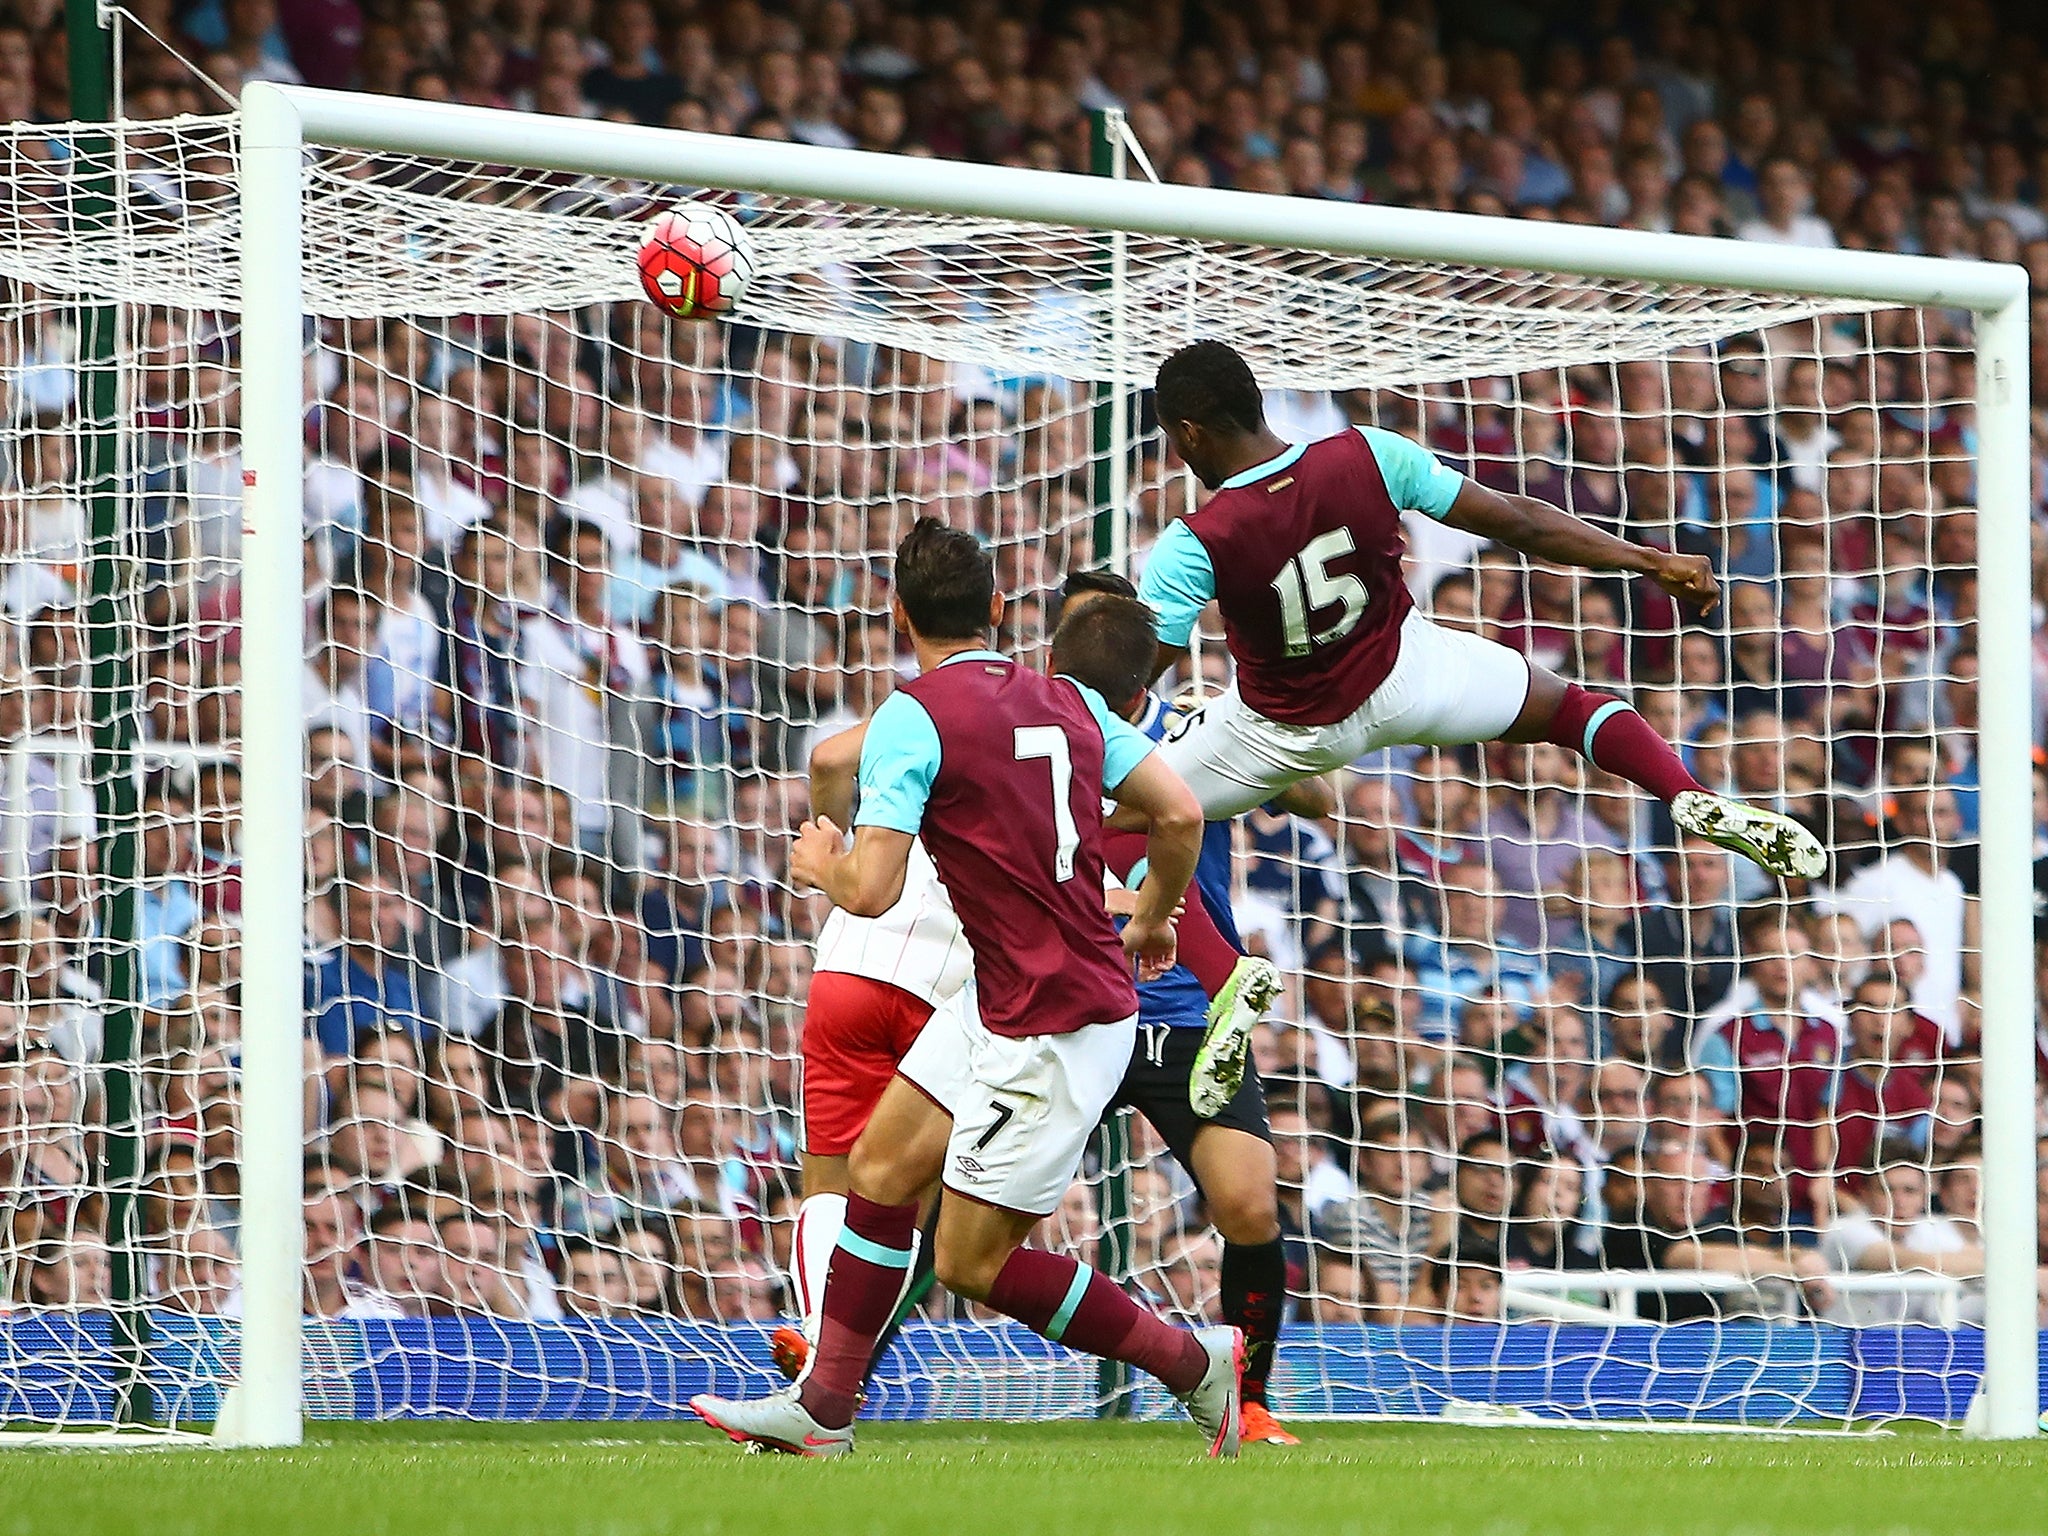 West Ham's Sengalese international Diafra Sakho scored twice for shortly before the interval